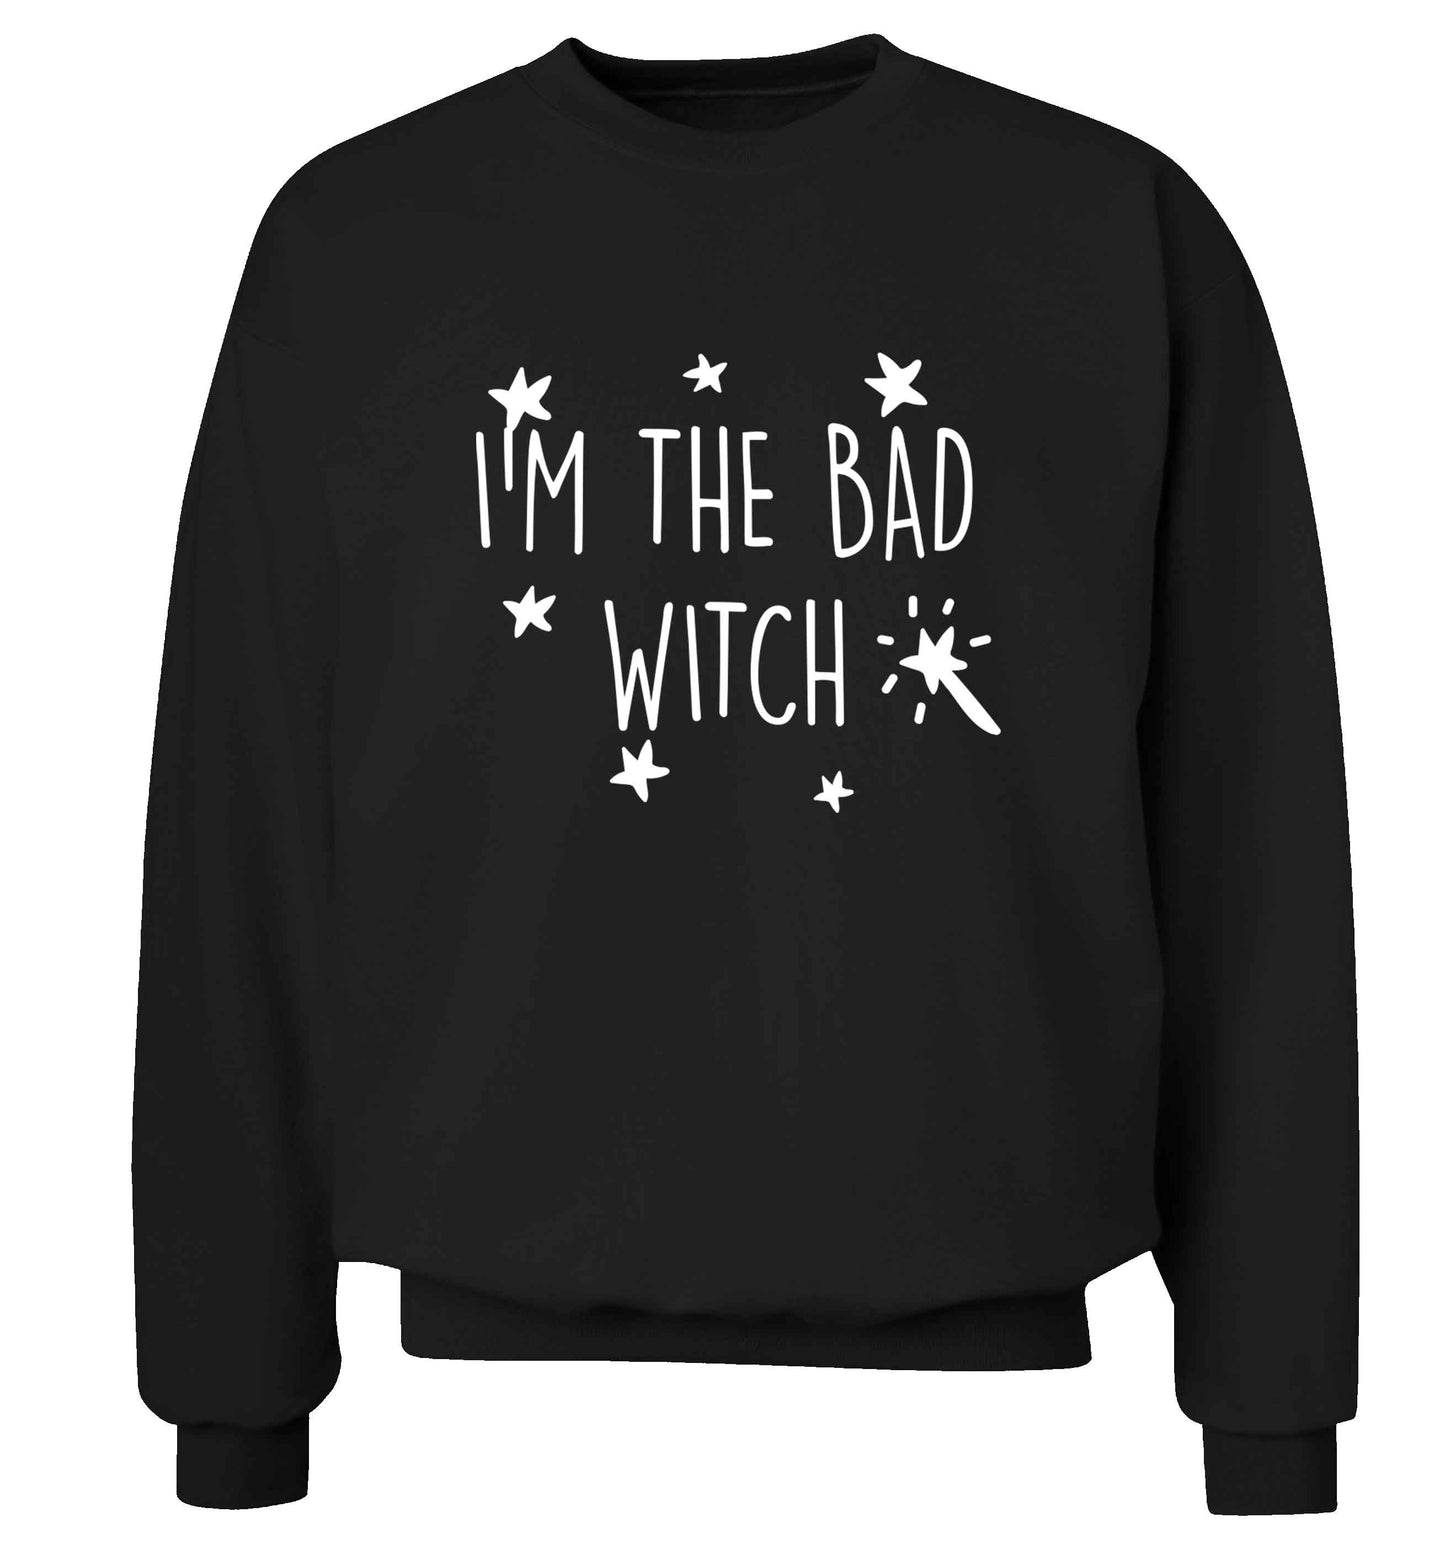 Bad witch adult's unisex black sweater 2XL